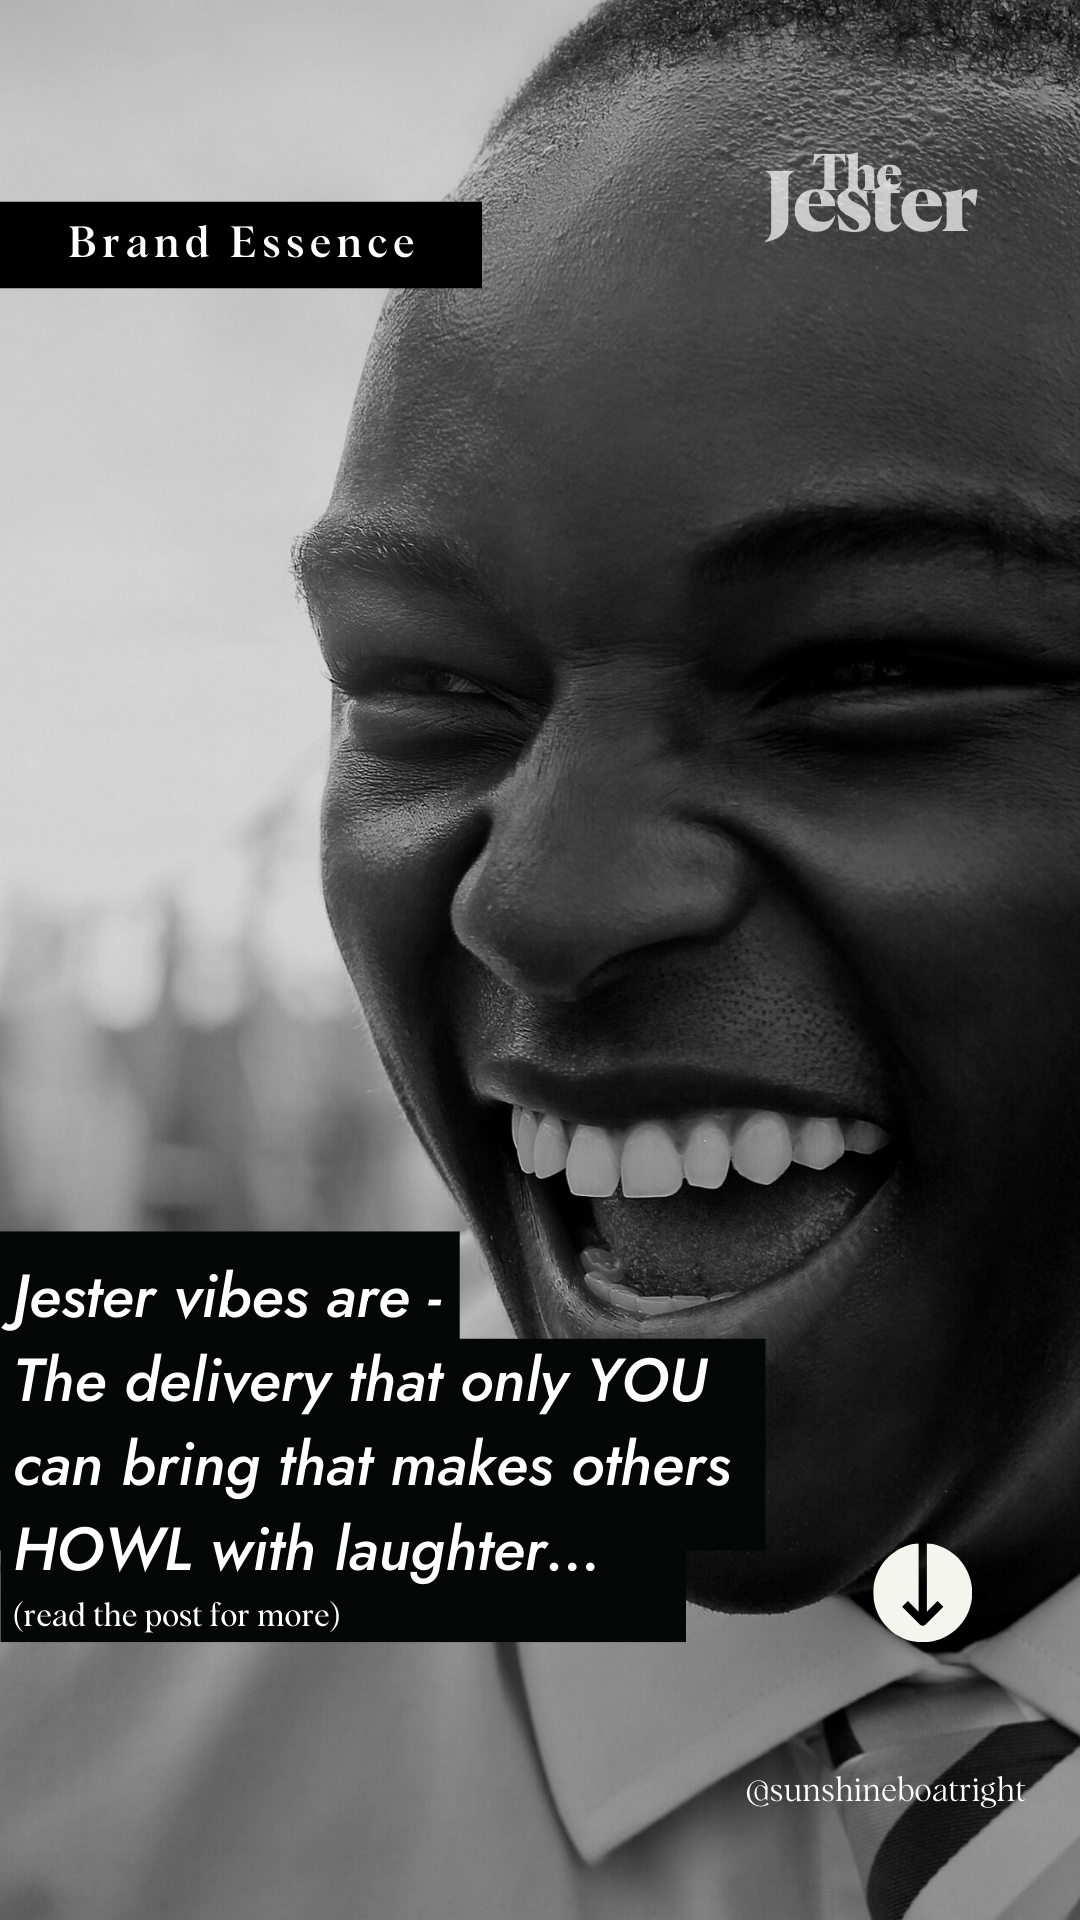 Brand Archetype Essence: Jester vibes are the delivery that only YOU can bring that makes others howl with laughter.